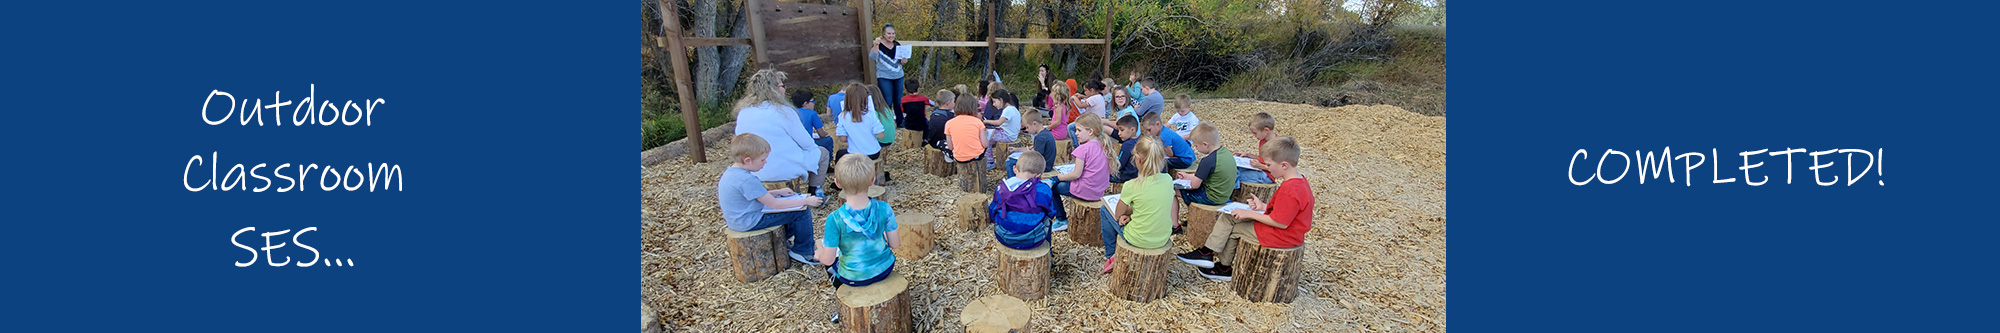 ses-outdoor-classroom-competed